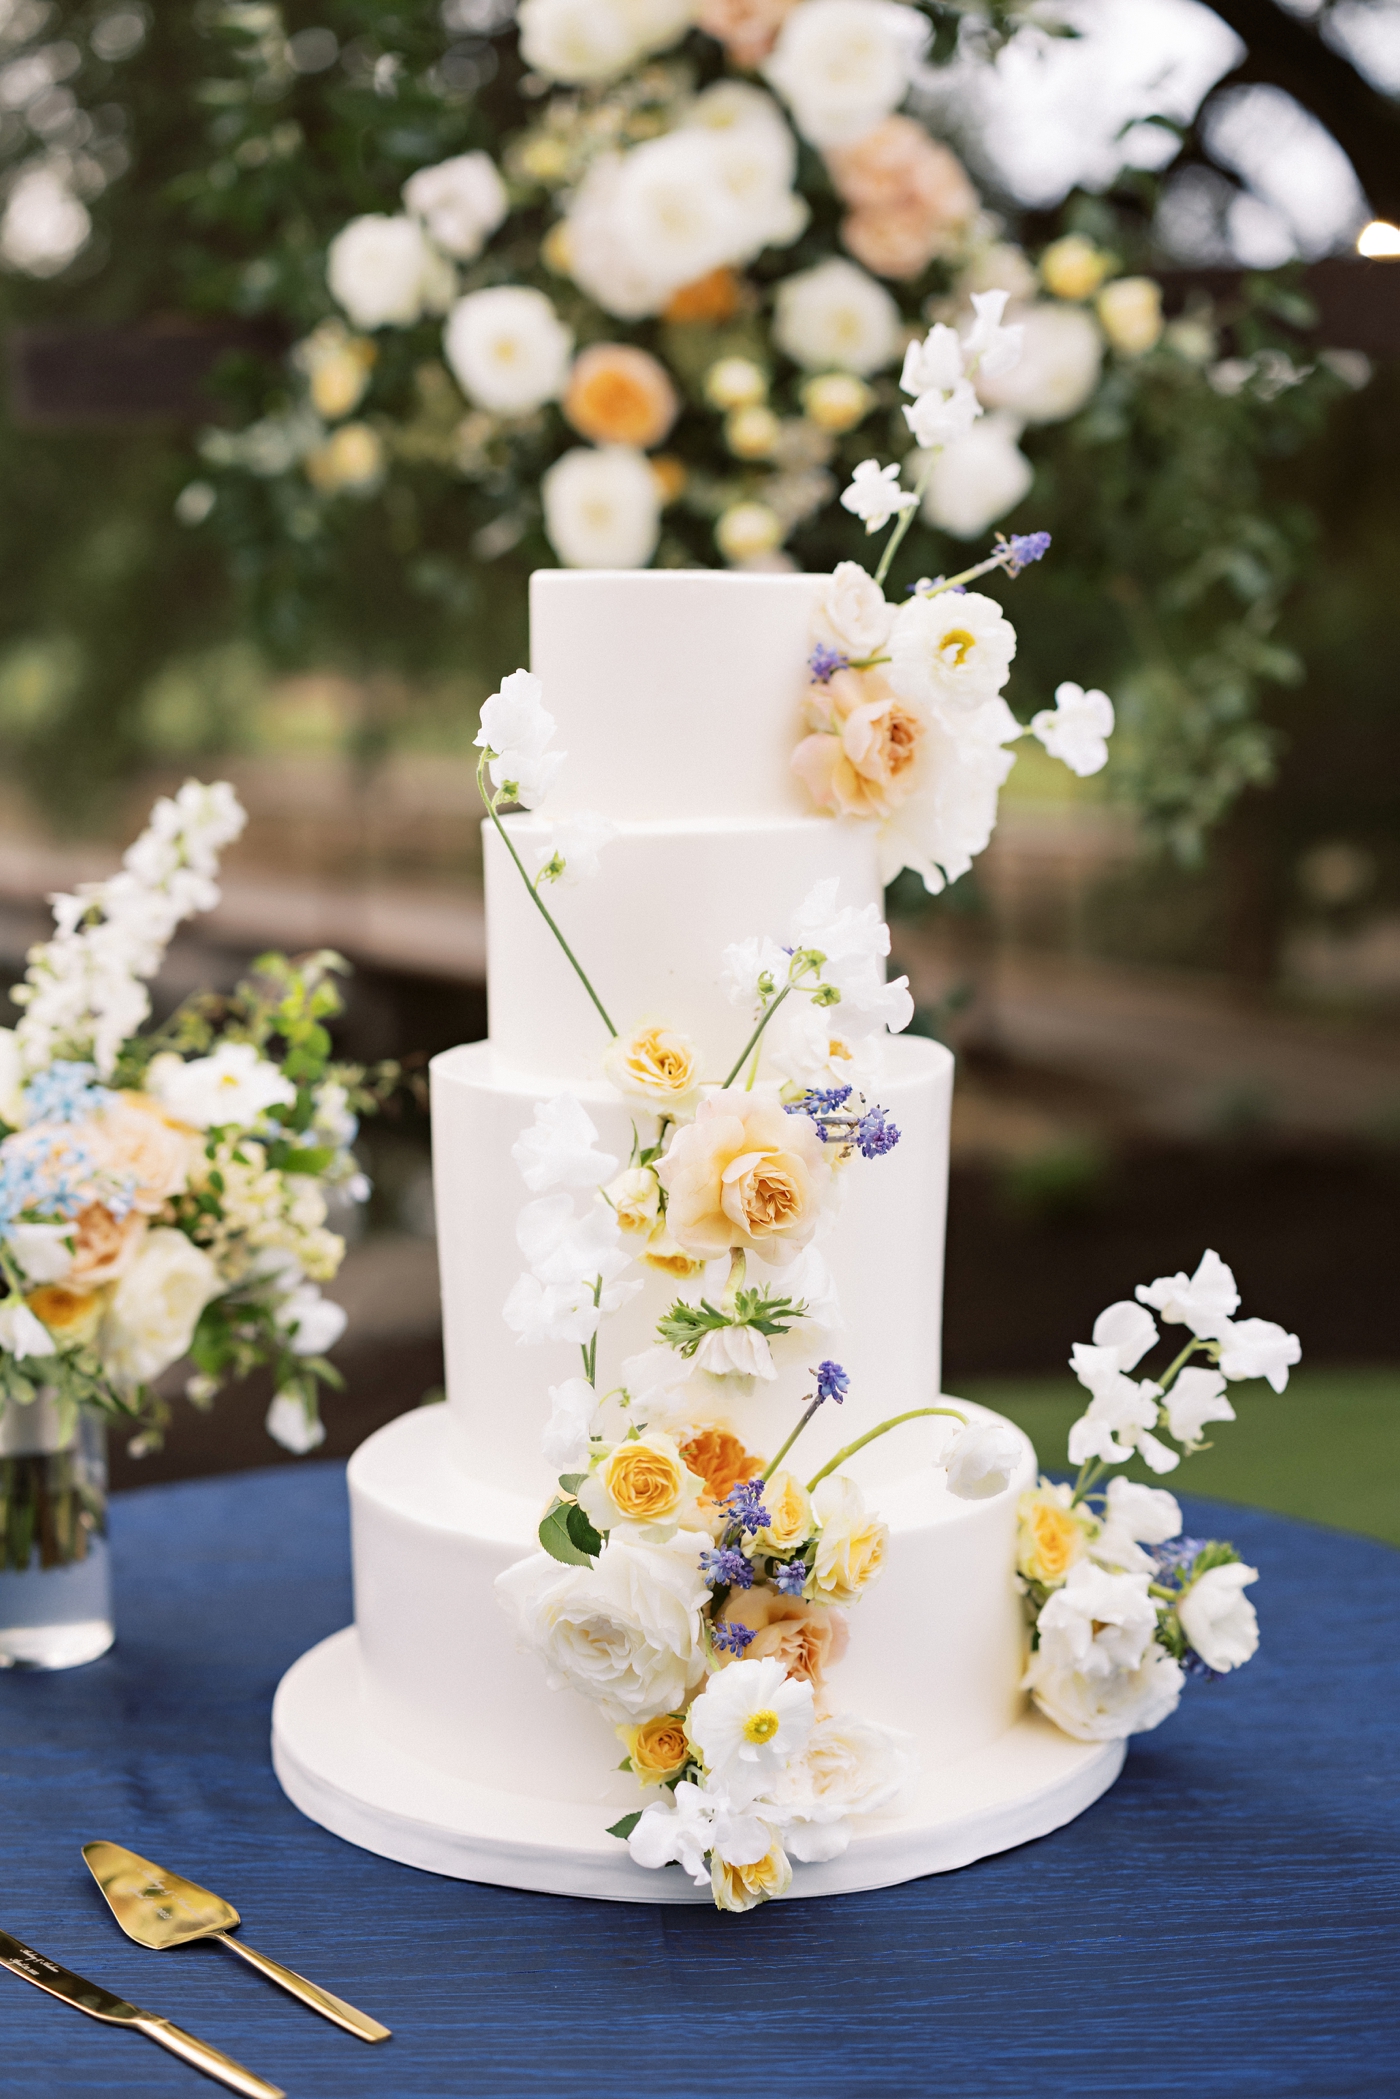 Four tier wedding cake by Simone Lee Bakery with fresh flowers